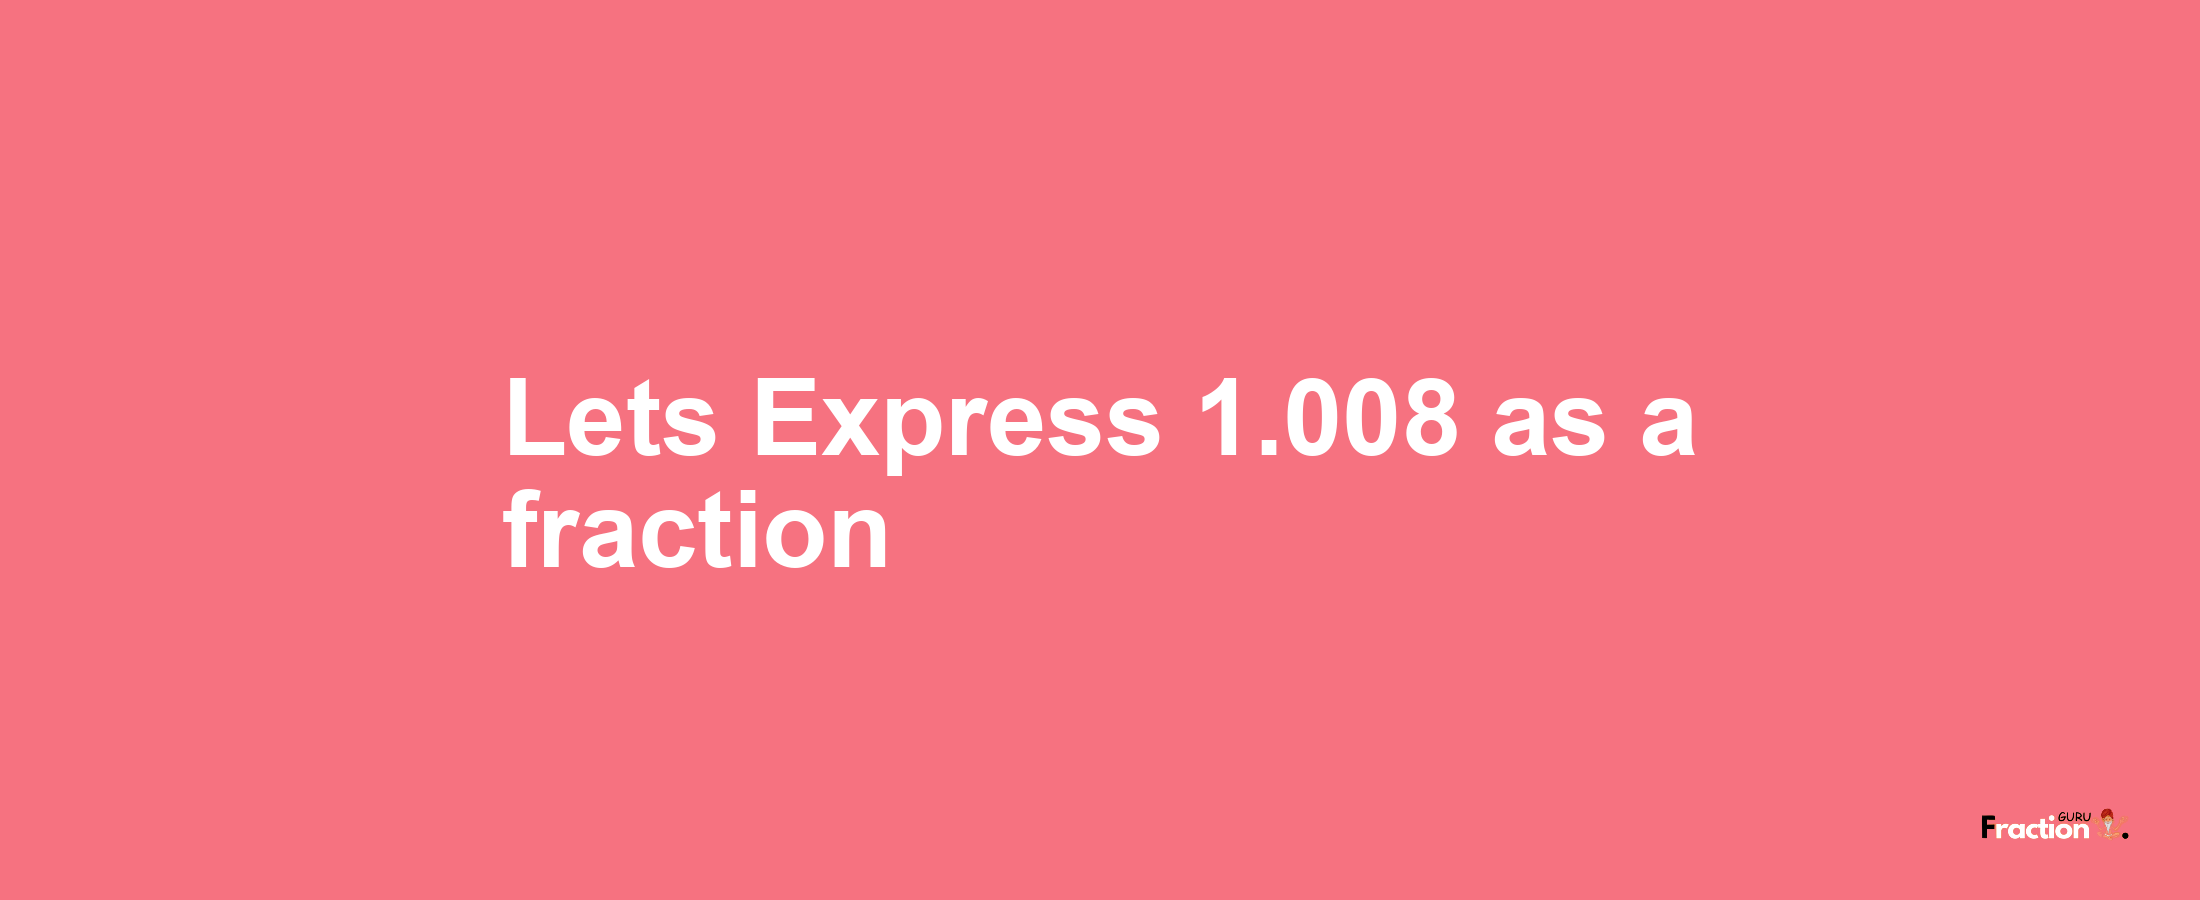 Lets Express 1.008 as afraction